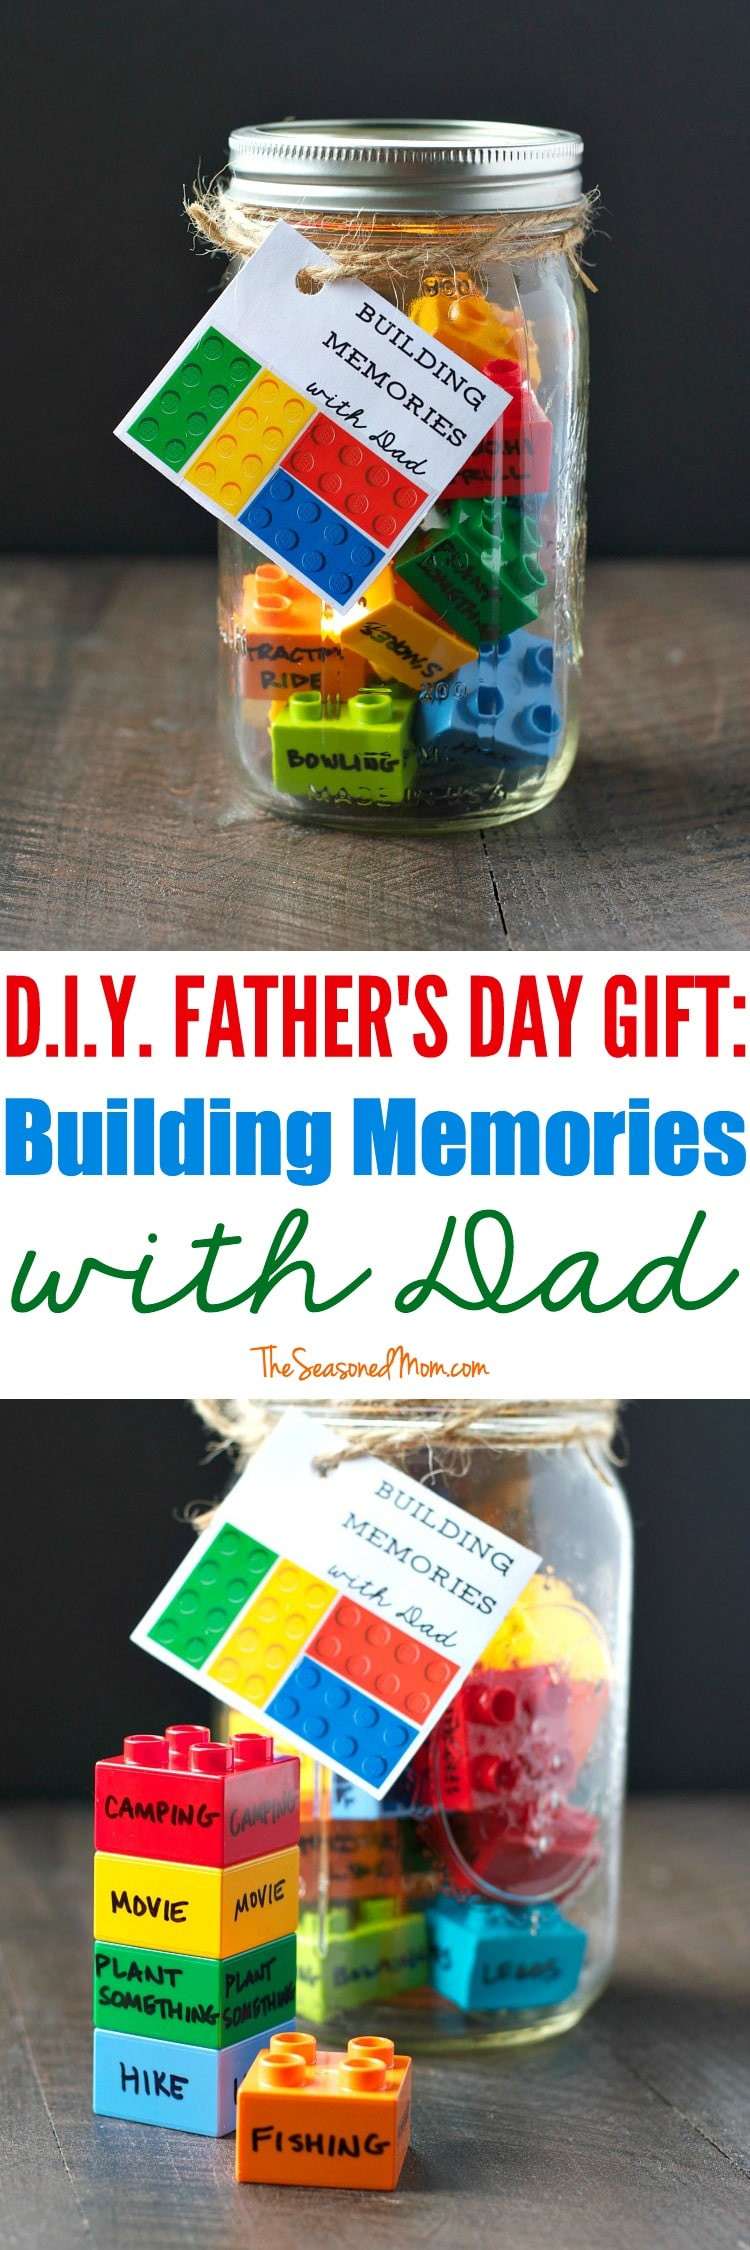 Ideas For Fathers Day Gifts
 25 Homemade Father s Day Gifts from Kids That Dad Can